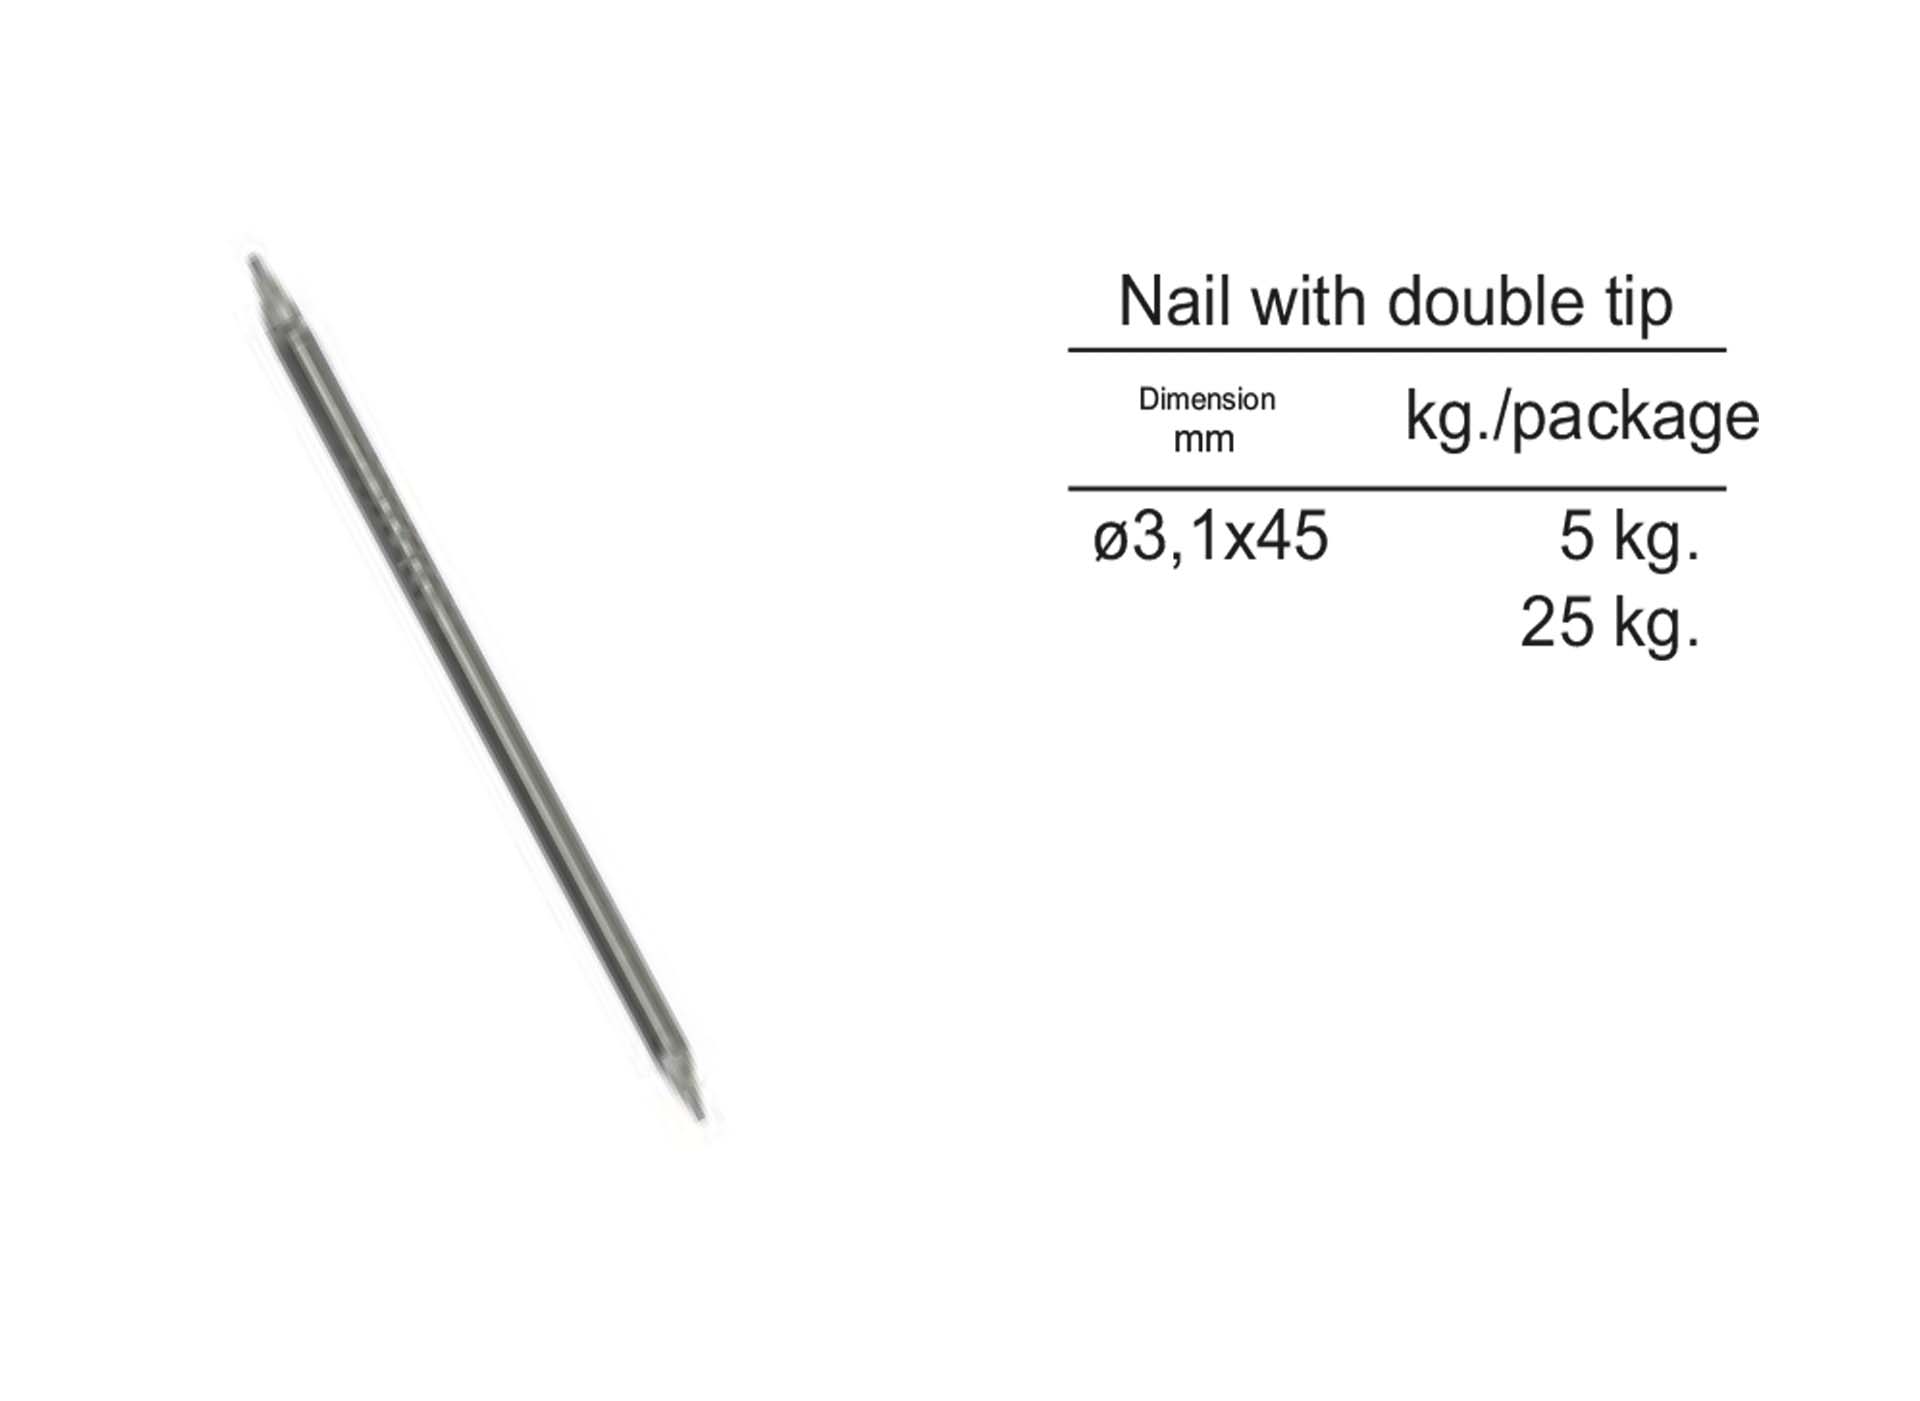 Nail with double tip